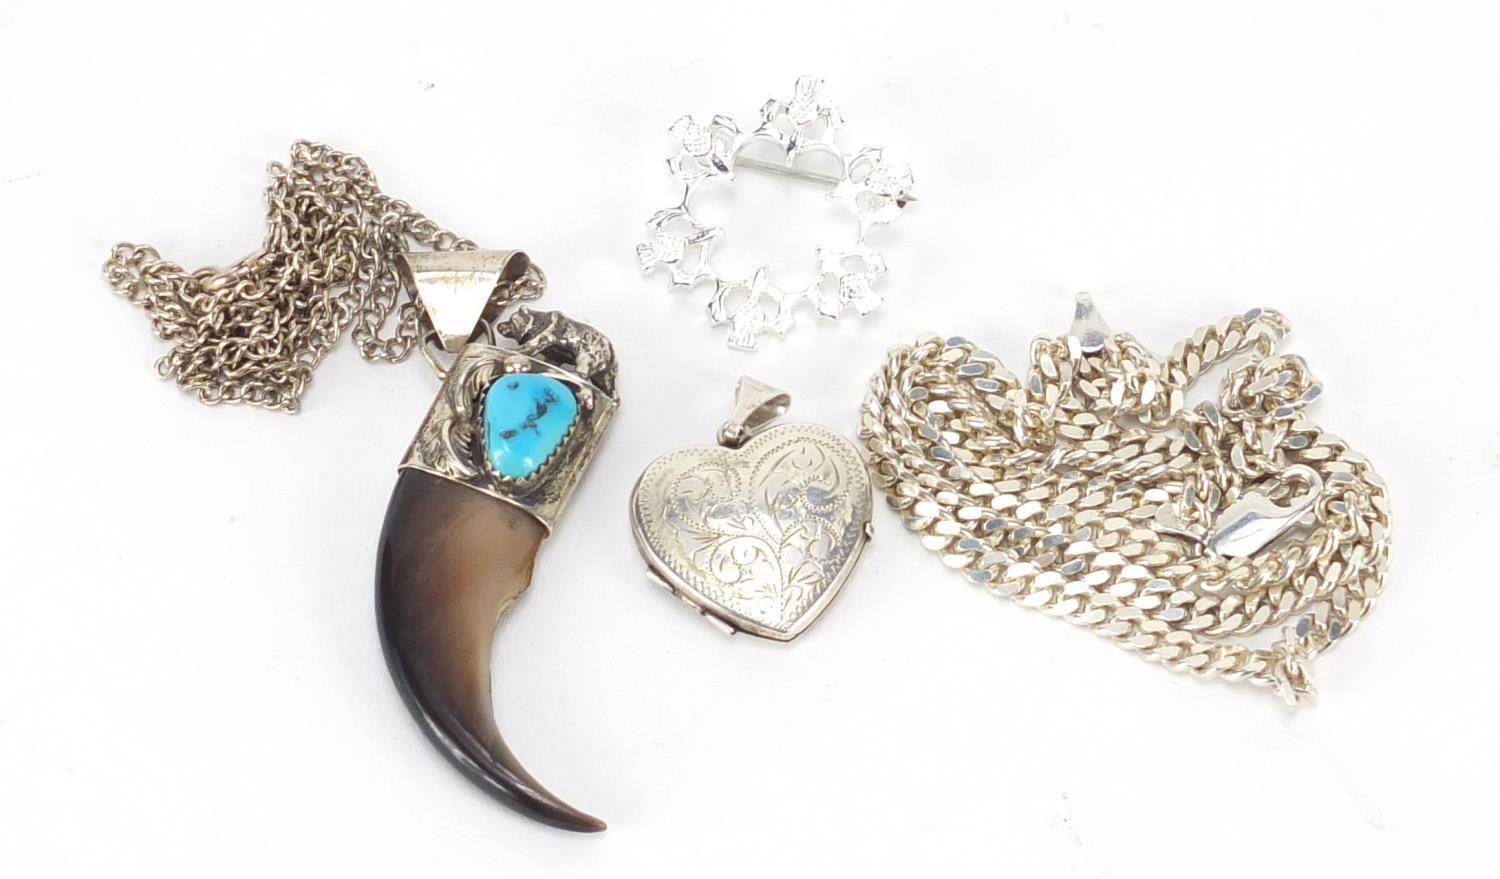 Mostly silver jewellery including a bear claw pendant and love heart locket, 43.0g : For Further